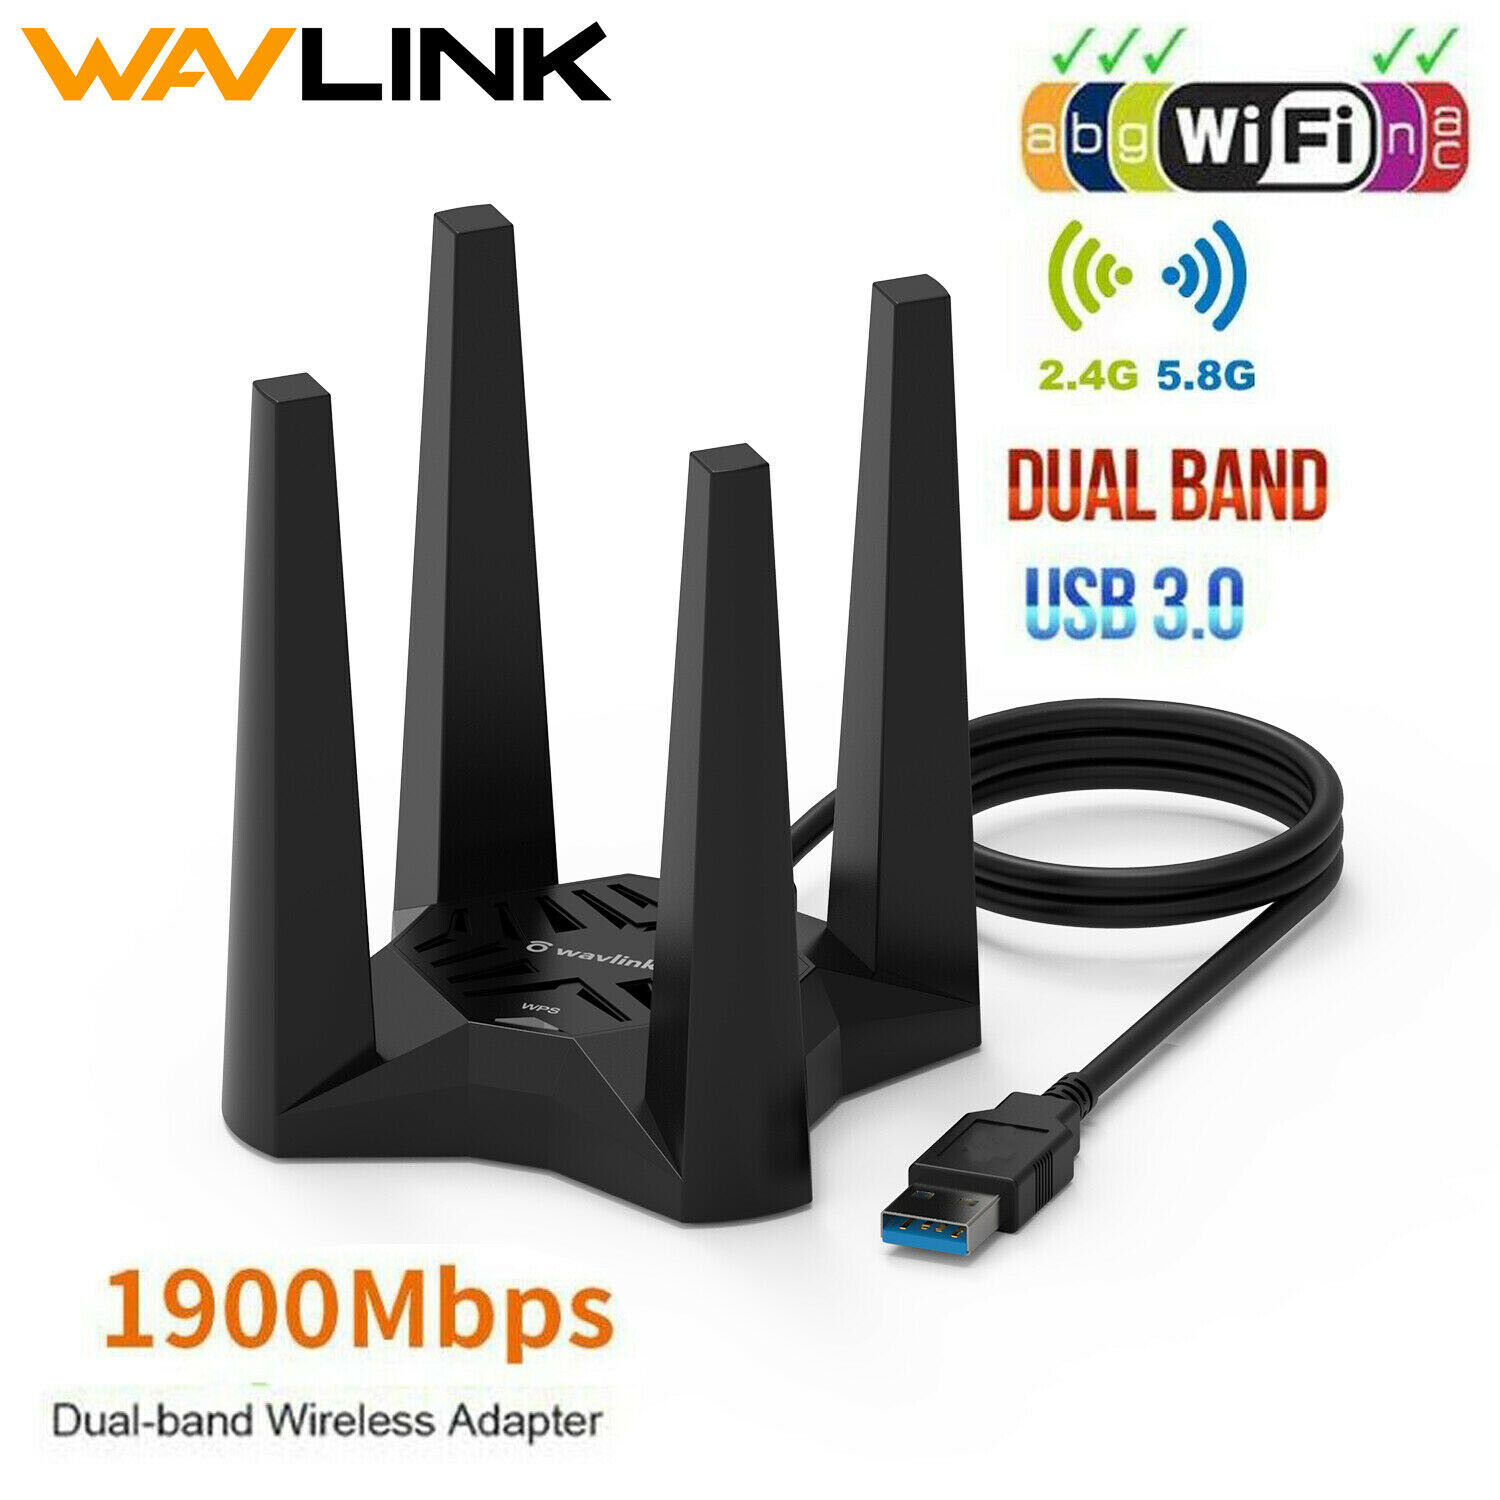 1900Mbps Long Range AC1900 Dual Band 2.4/5G Wireless USB 3.0 WiFi Adapter US. Available Now for 27.59